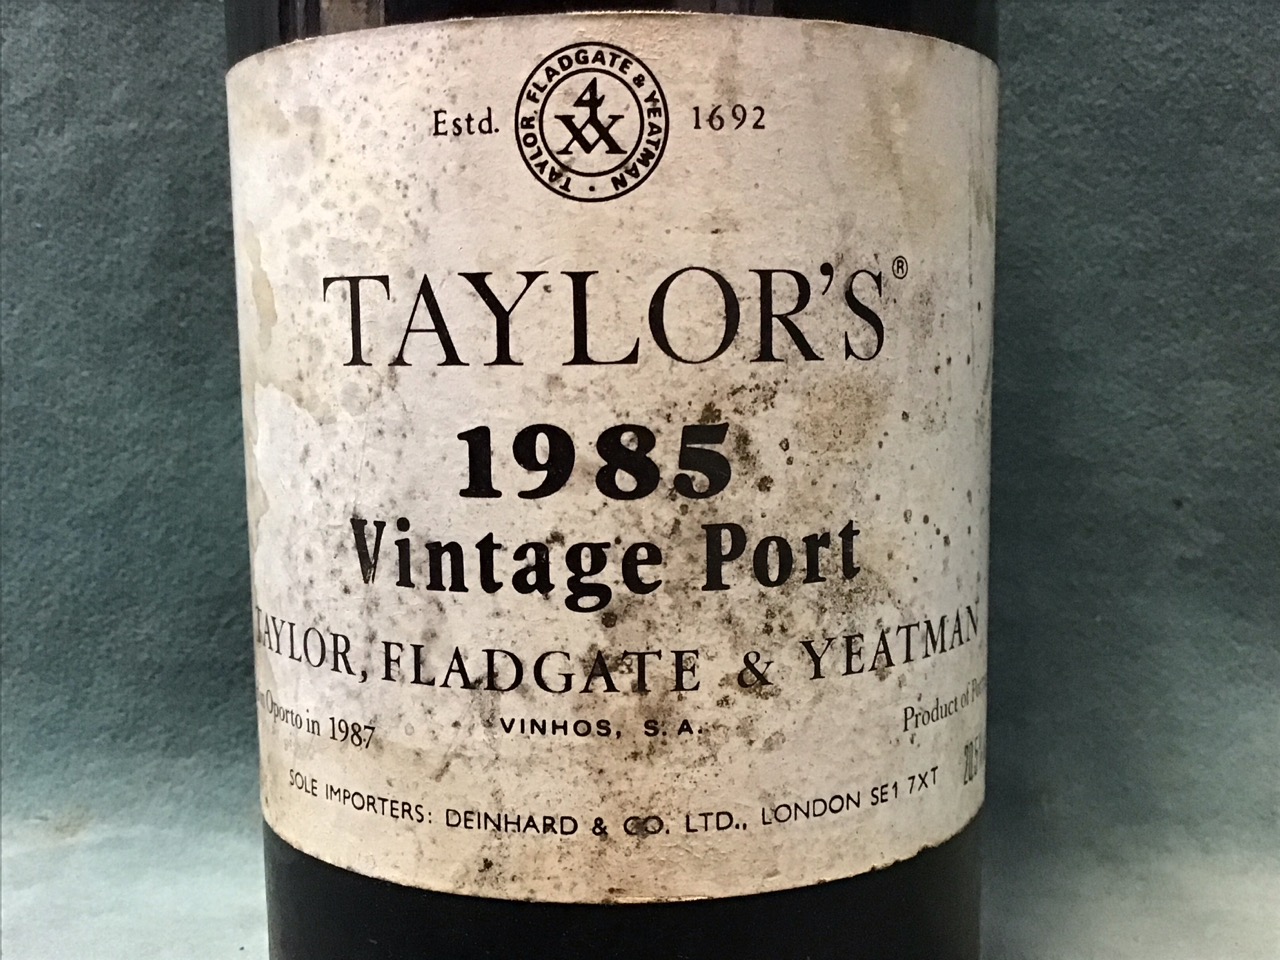 A 1985 bottle of Taylors vintage port, the seal numbered 405781. (75cl) - Image 2 of 3